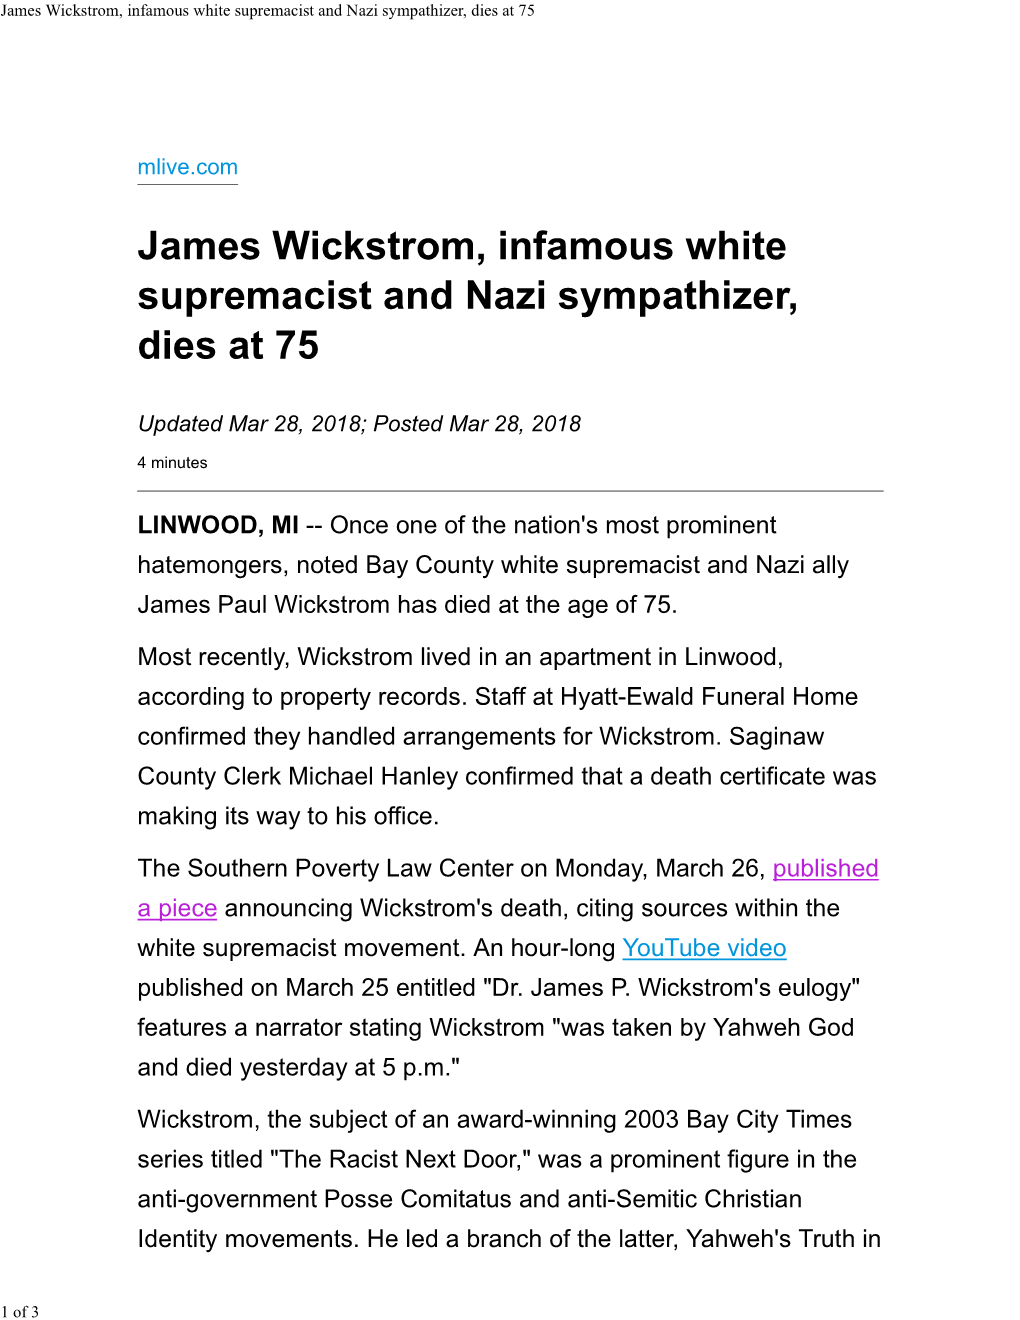 James Wickstrom, Infamous White Supremacist and Nazi Sympathizer, Dies at 75